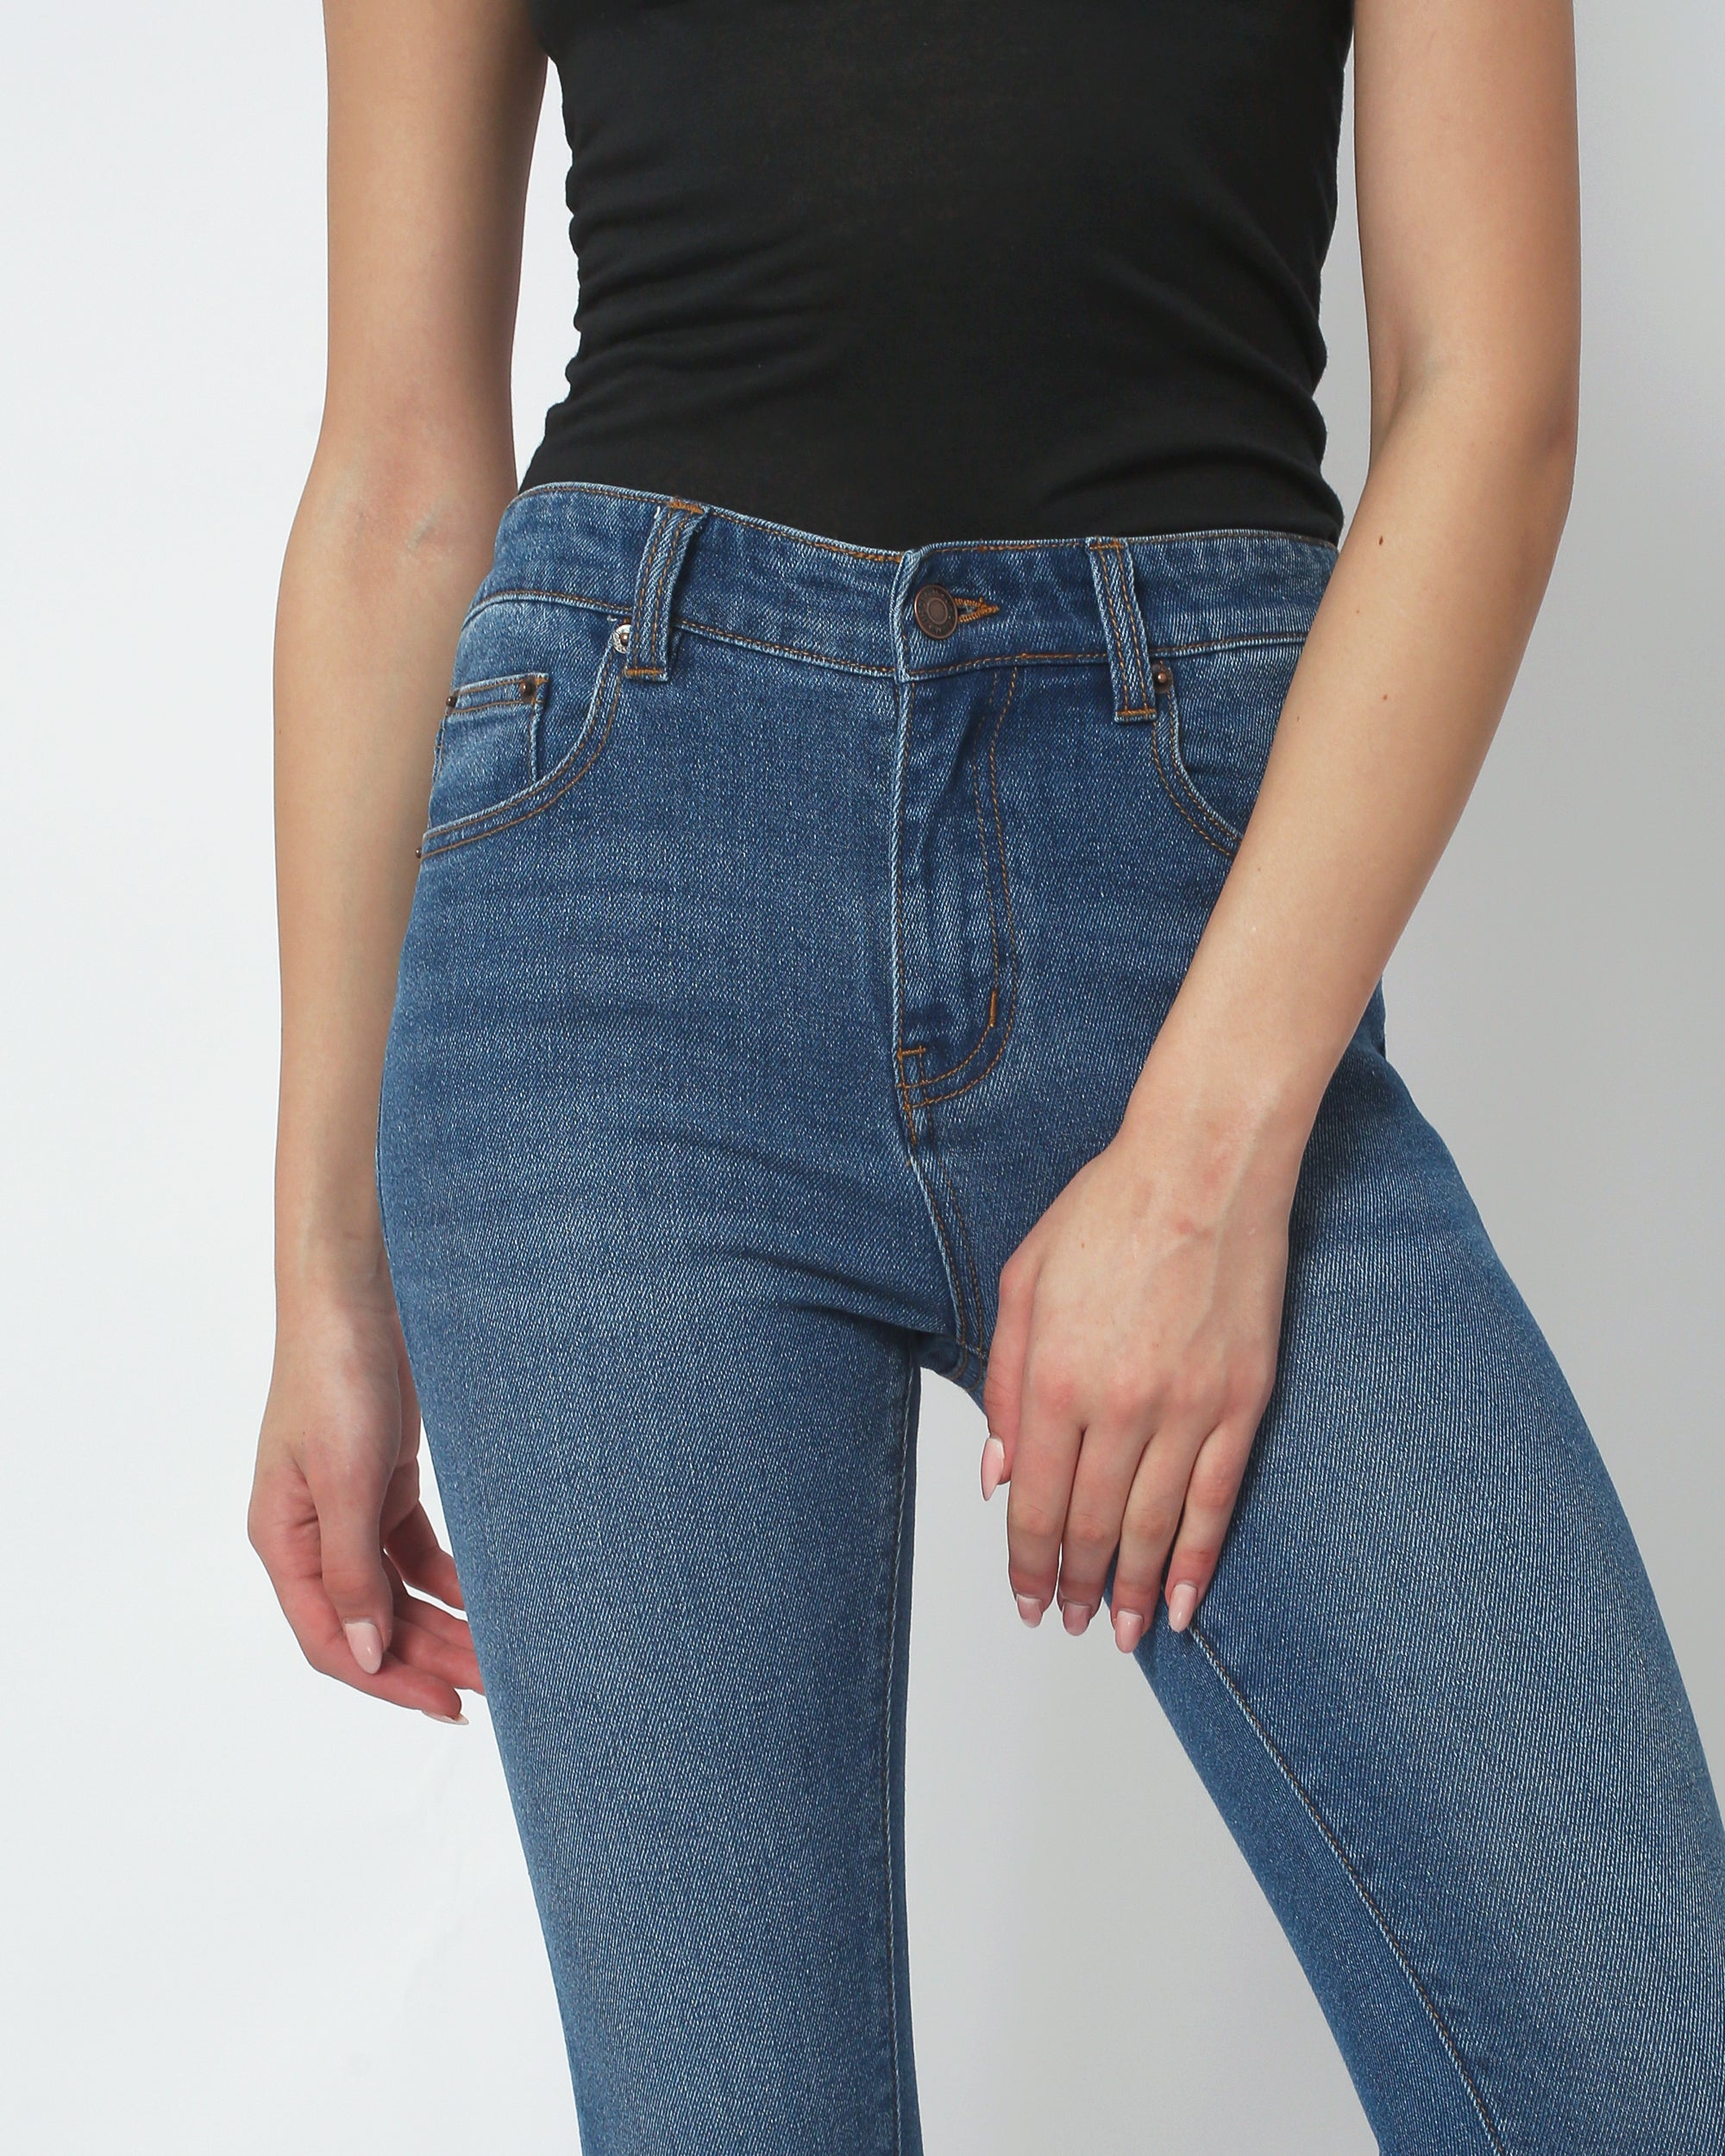 Details more than 50 petite cropped skinny jeans